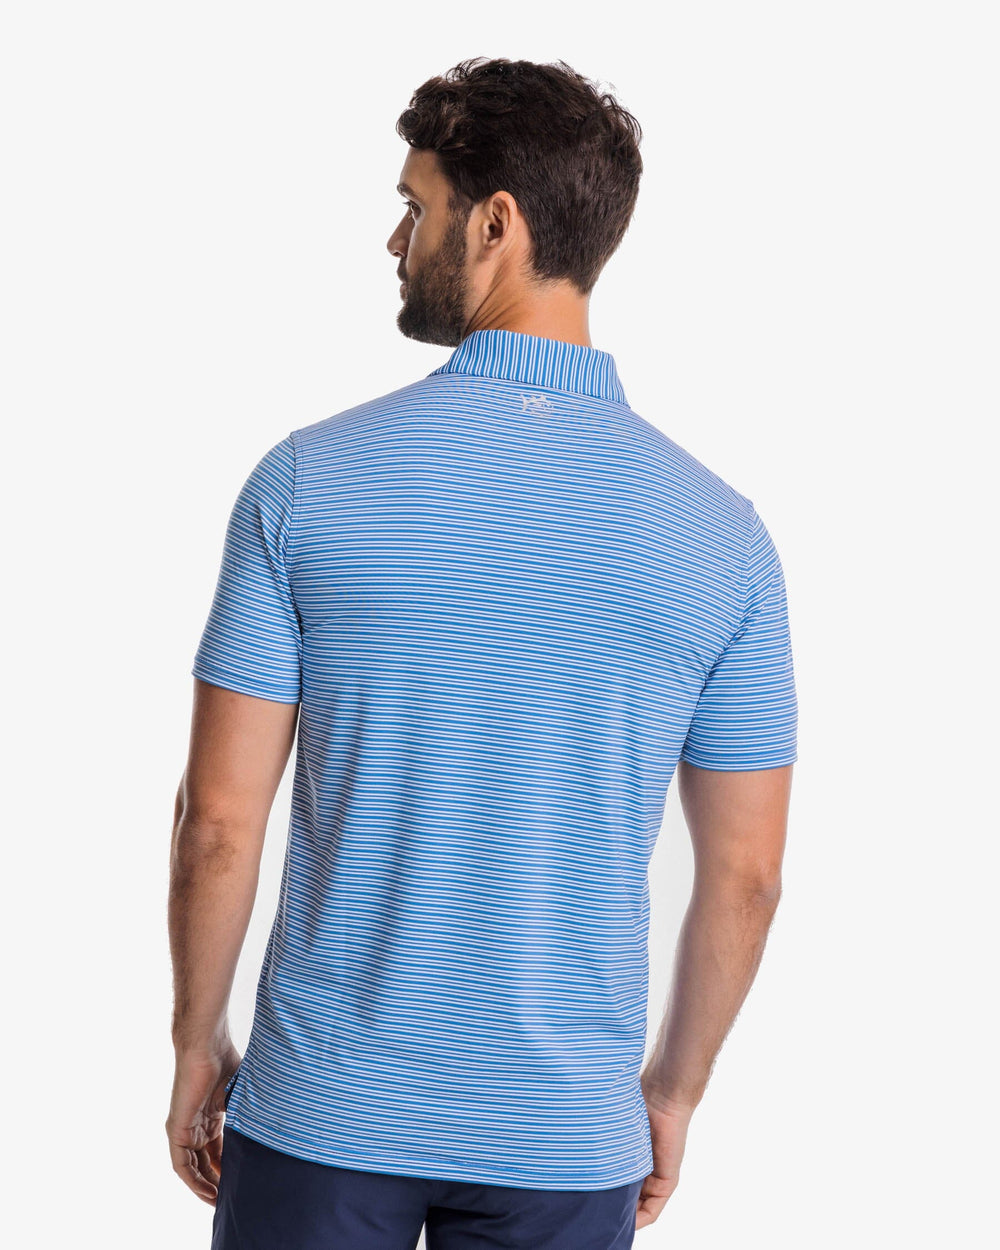 The back view of the Southern Tide brrr-eeze Millwood Stripe Performance Polo Shirt by Southern Tide - Atlantic Blue